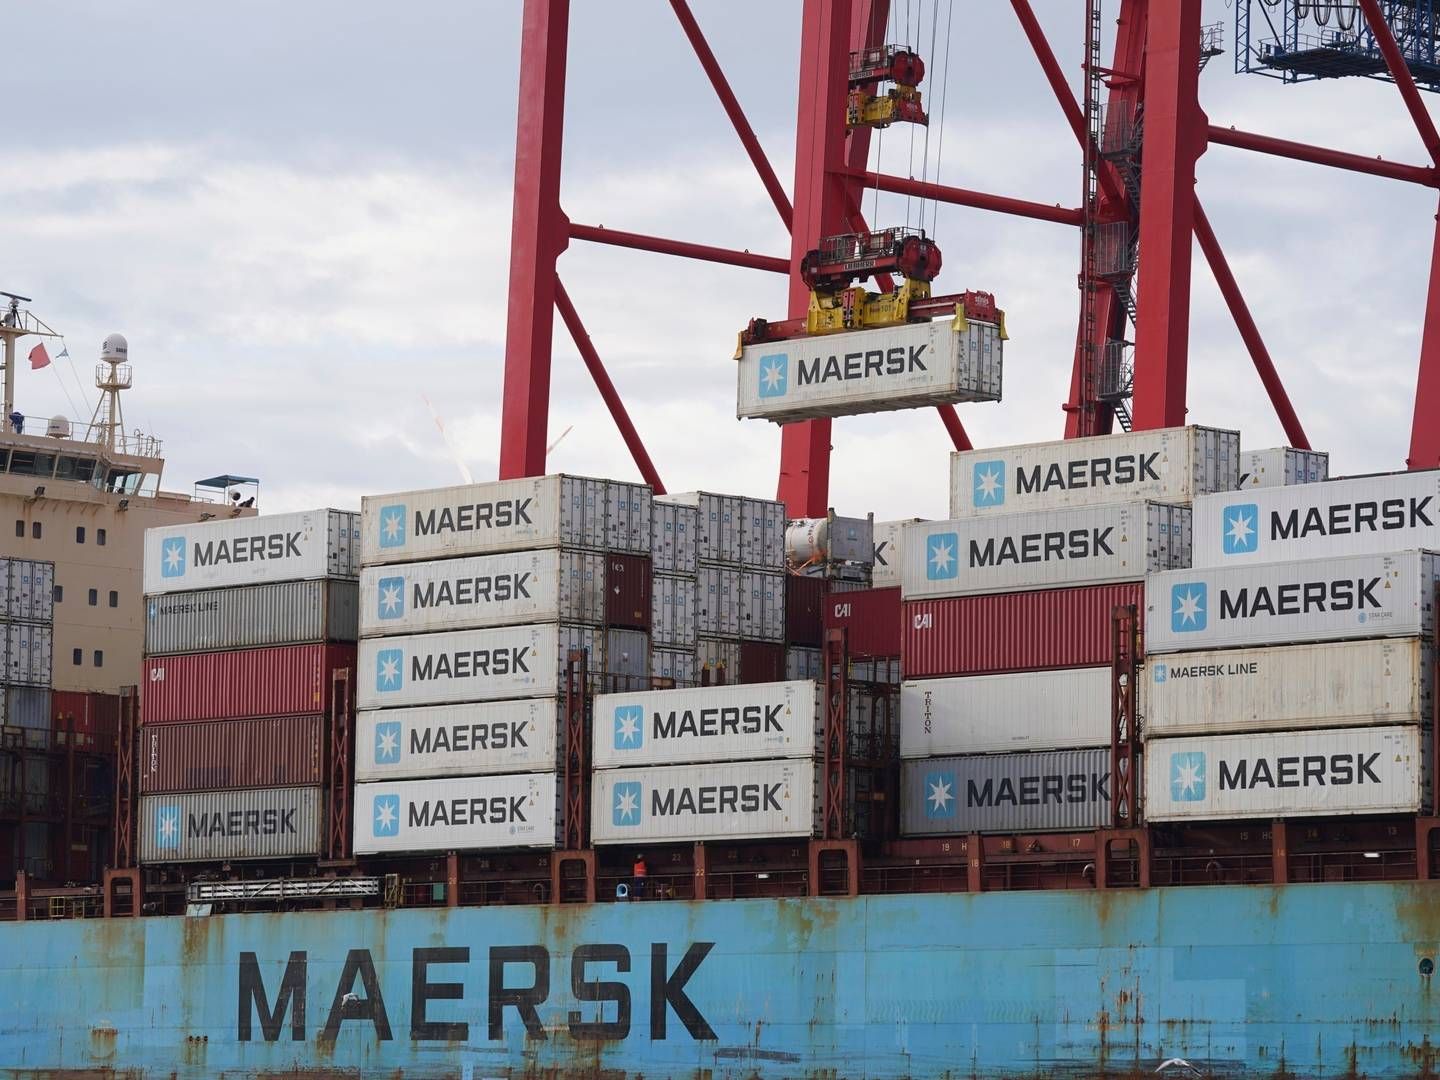 Maersk has the stated goal of reaching net-zero emissions by 2040, which requires that ships sail on green alternatives to traditional bunker oil. | Photo: Marcus Brandt/AP/Ritzau Scanpix